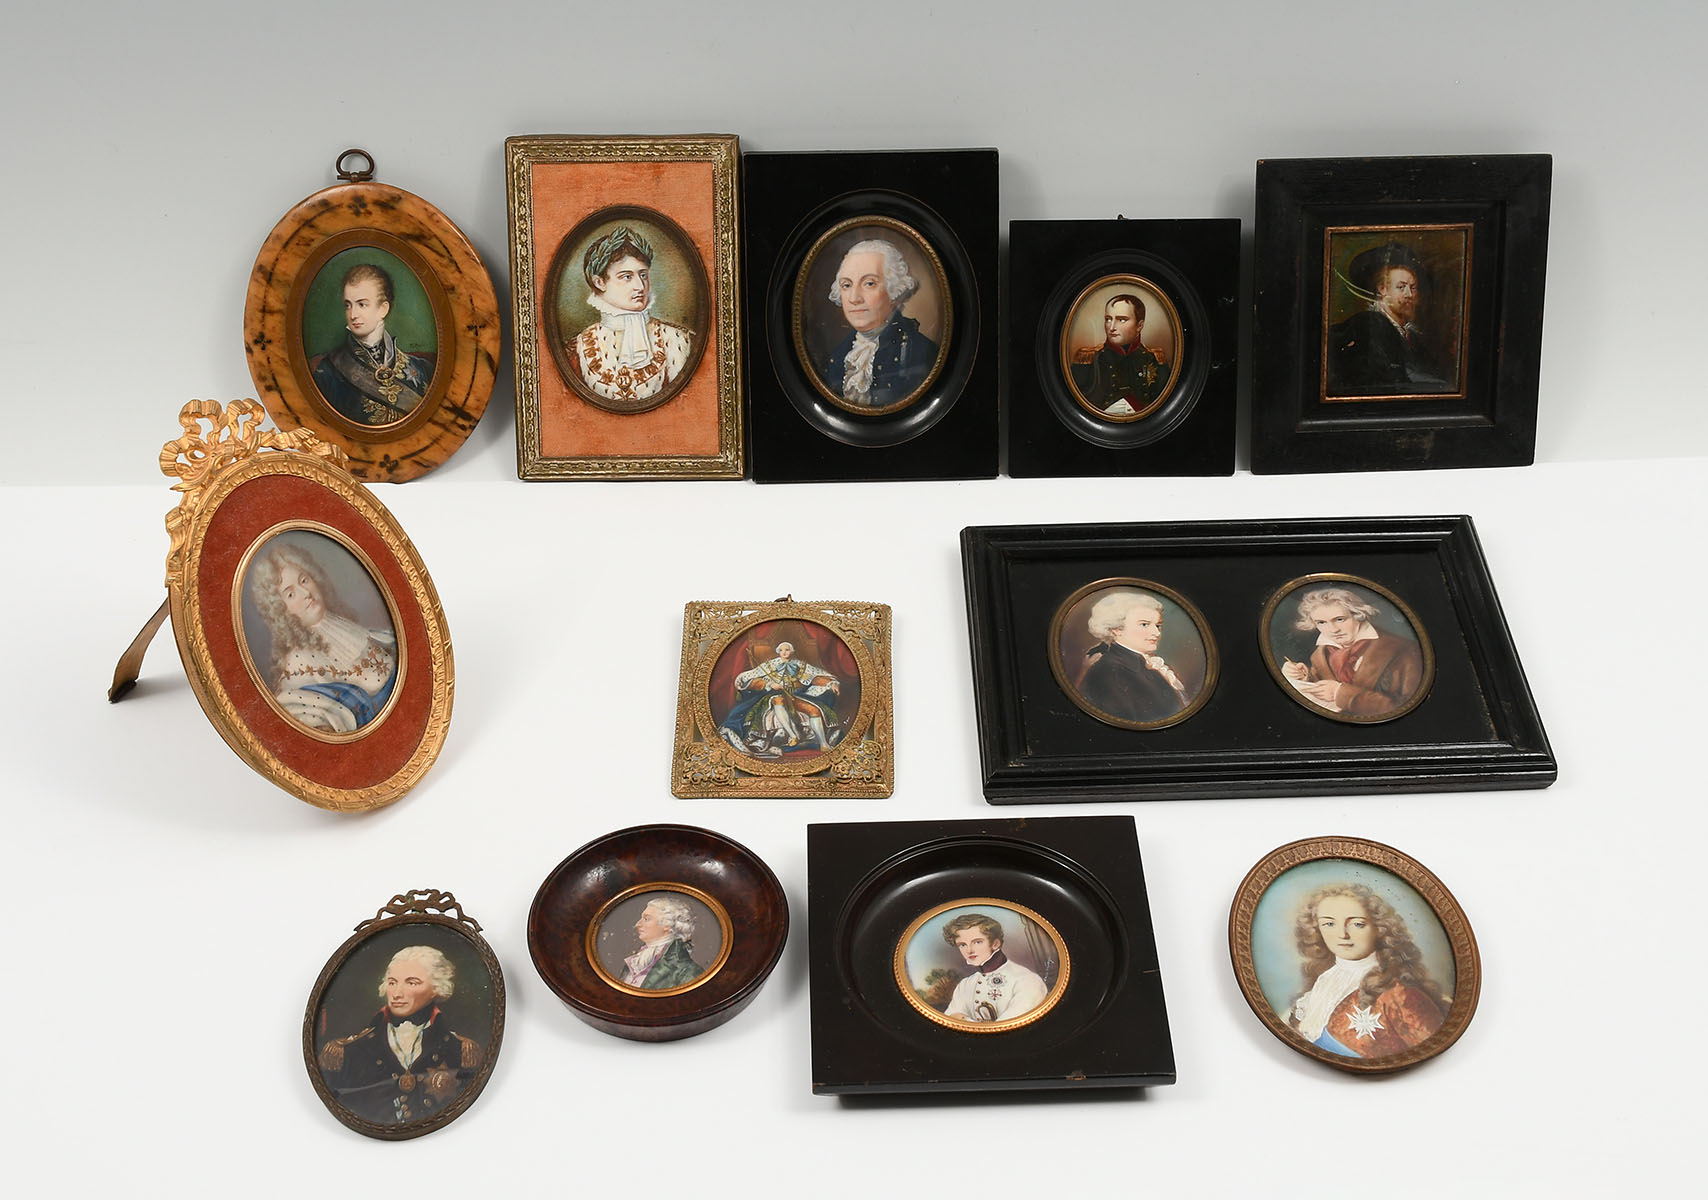 13-PIECE MINIATURE PAINTING COLLECTION: